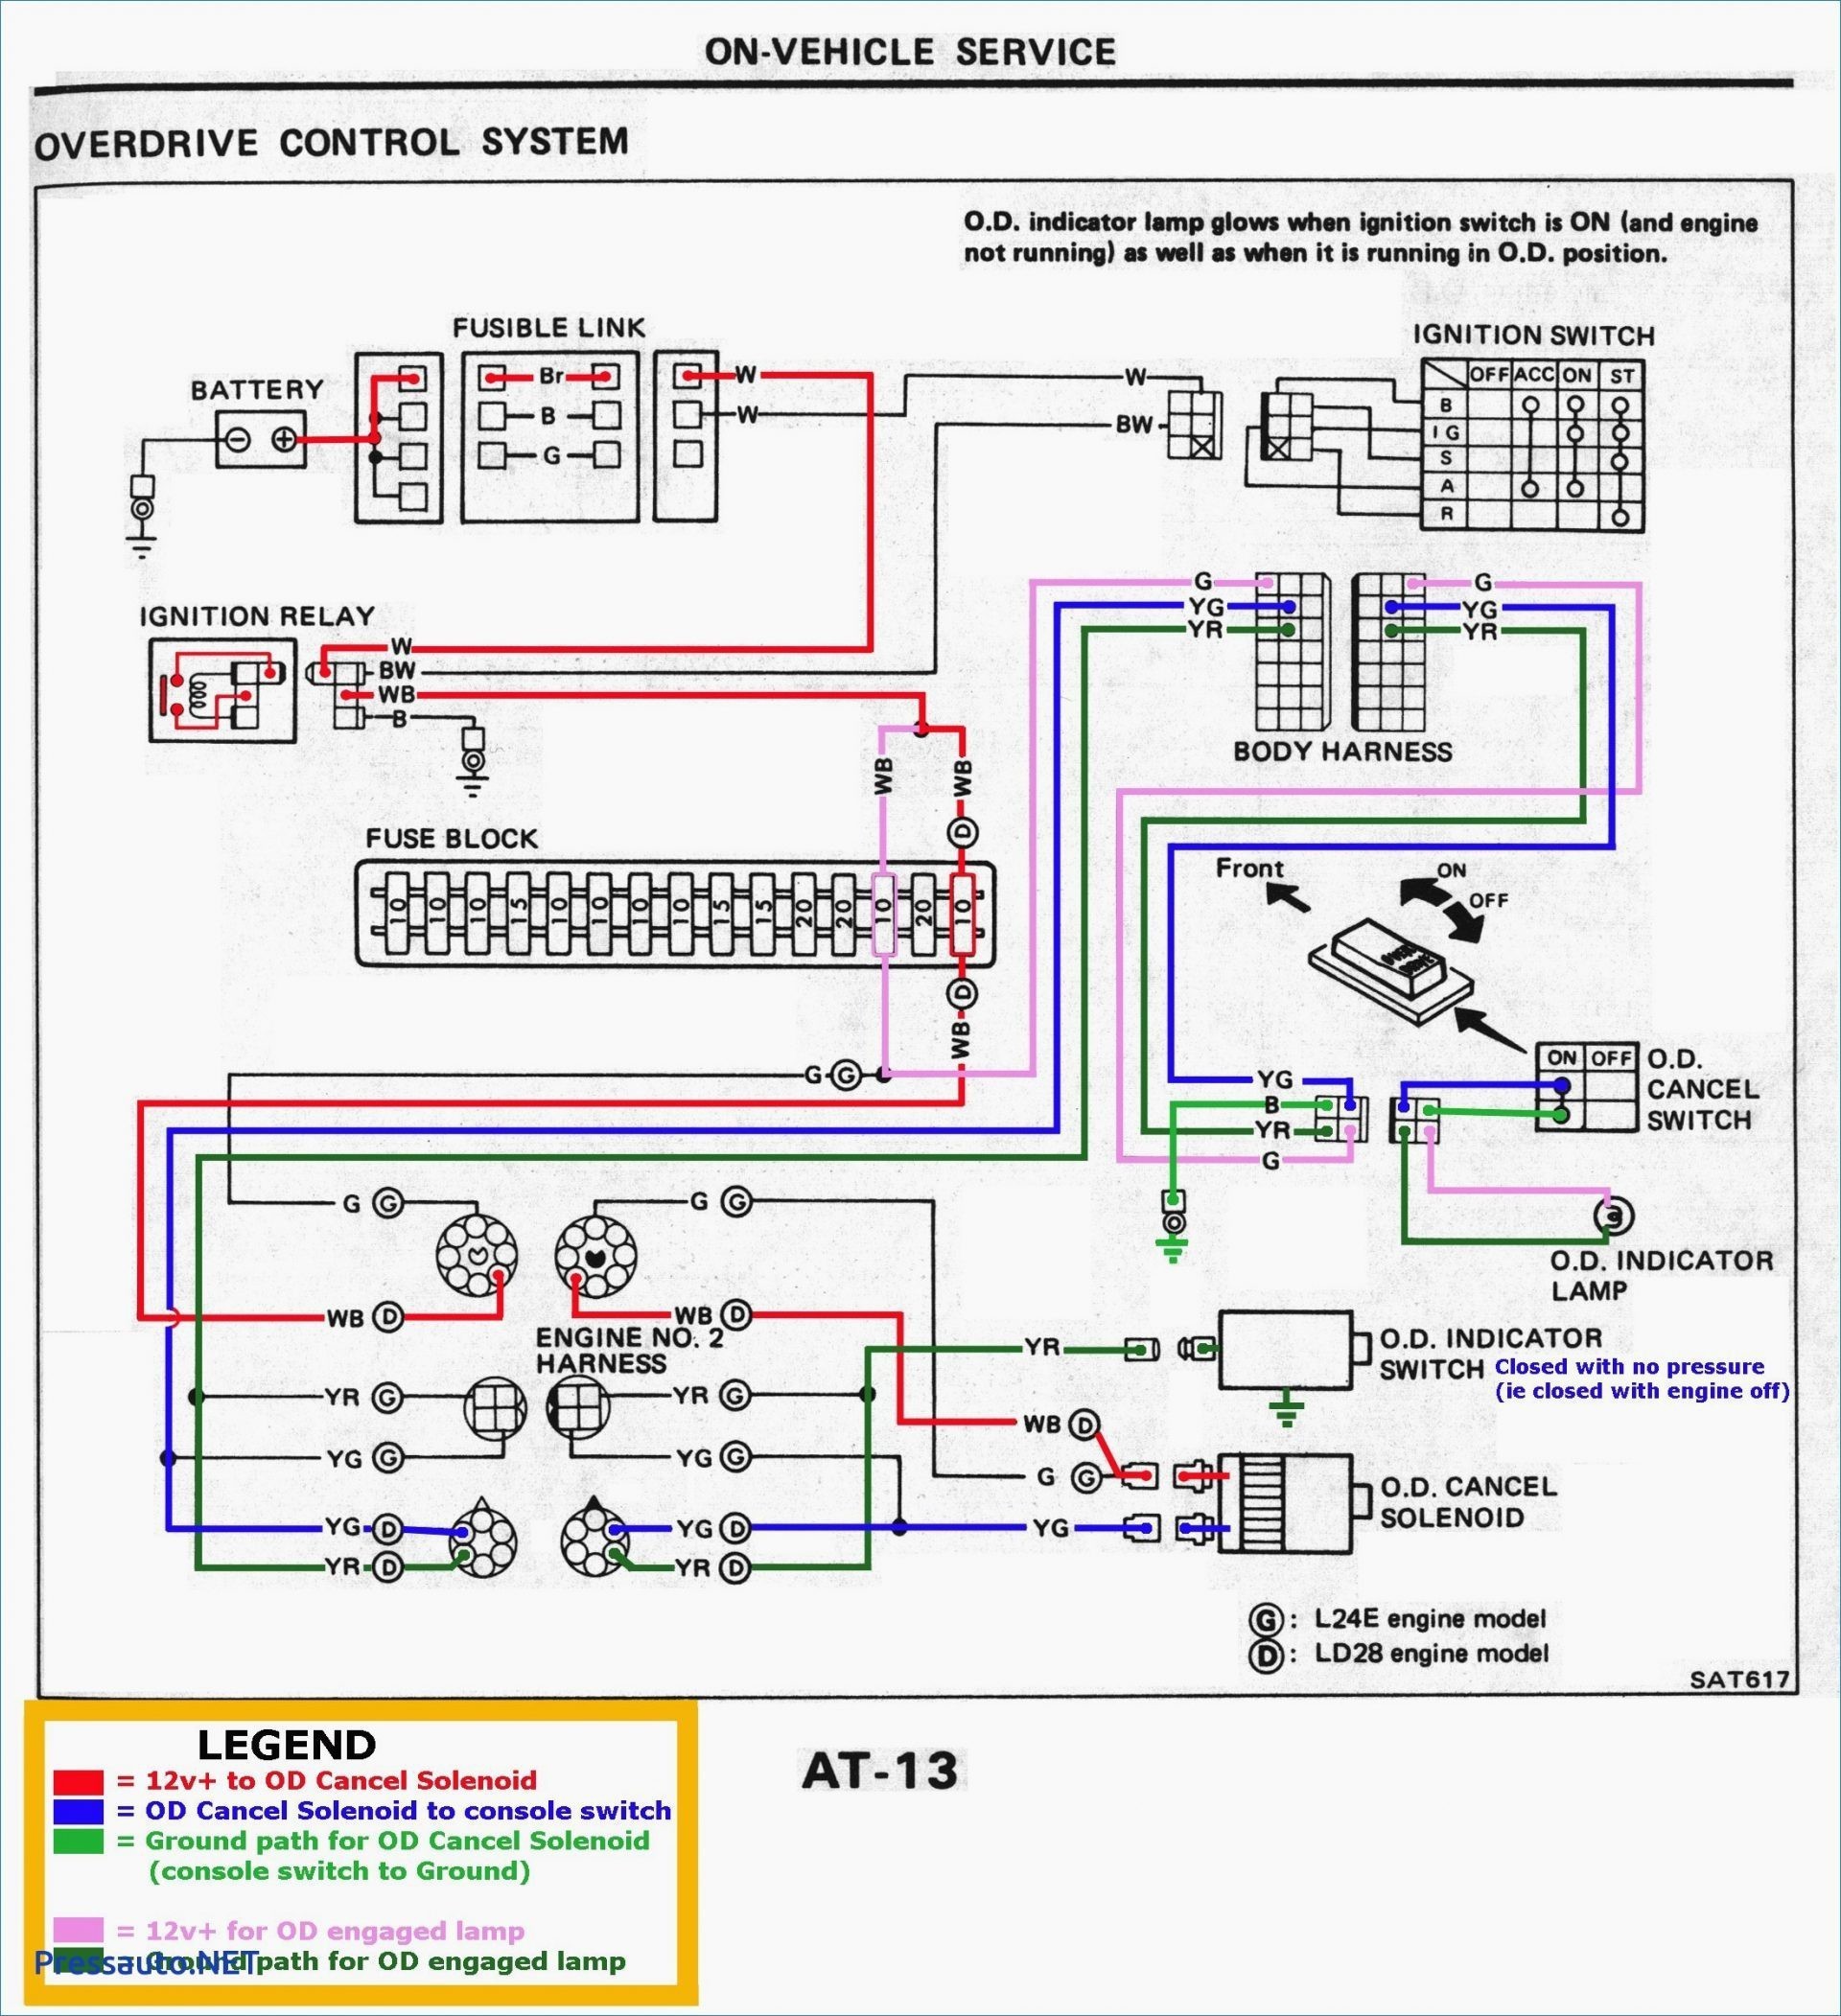 1995 toyota Camry Engine Diagram toyota Wire Color Code Simple Guide About Wiring Diagram